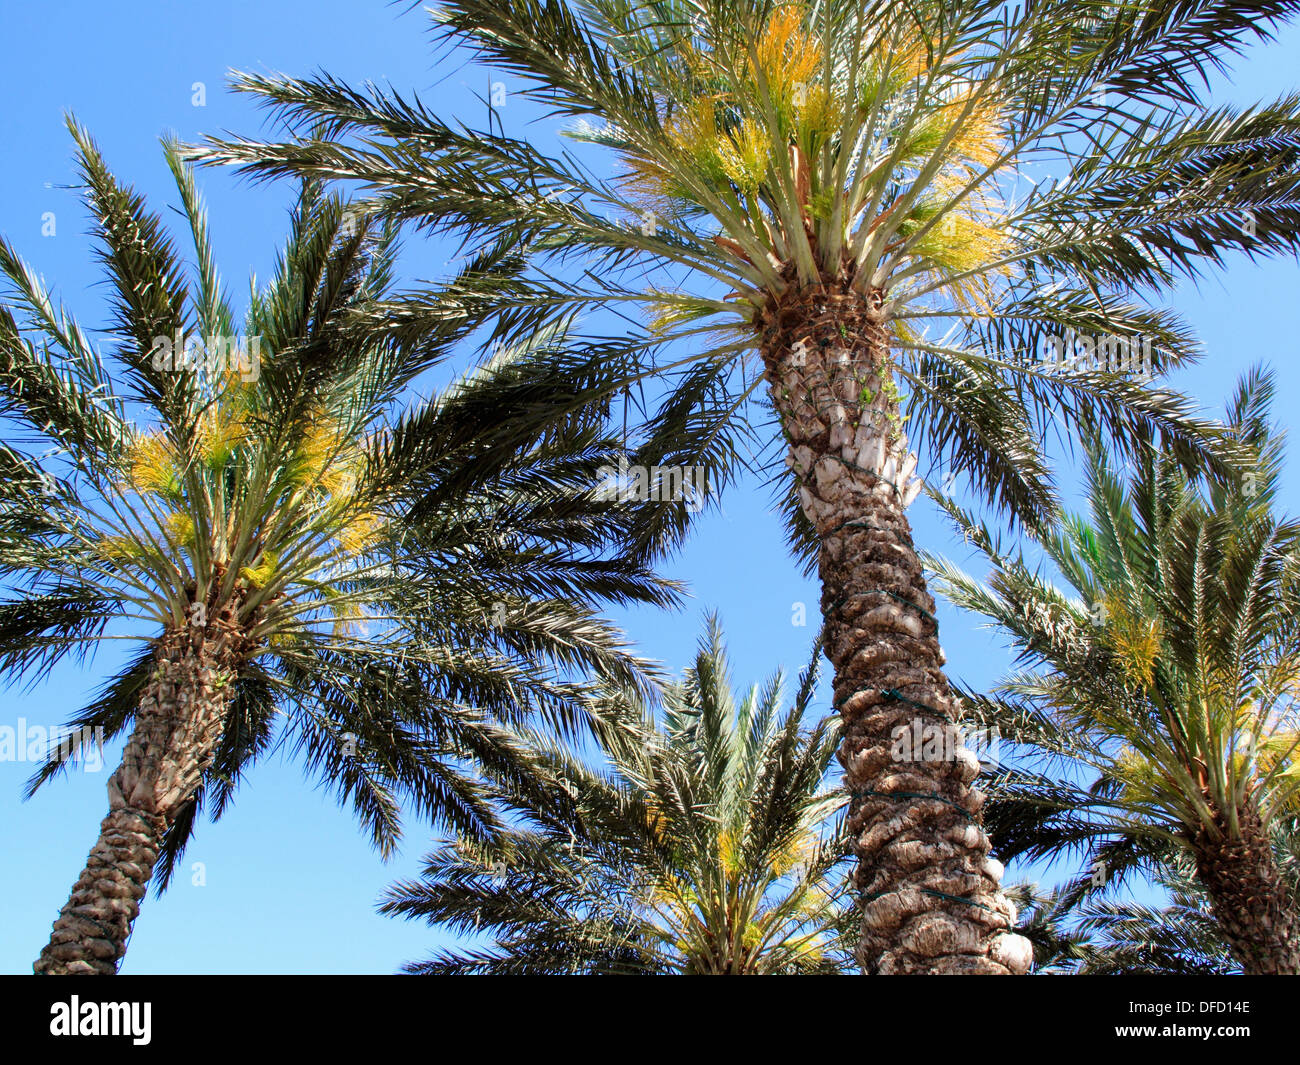 Sabal palmetto or Sabal or Cabbage palm trees. Stock Photo